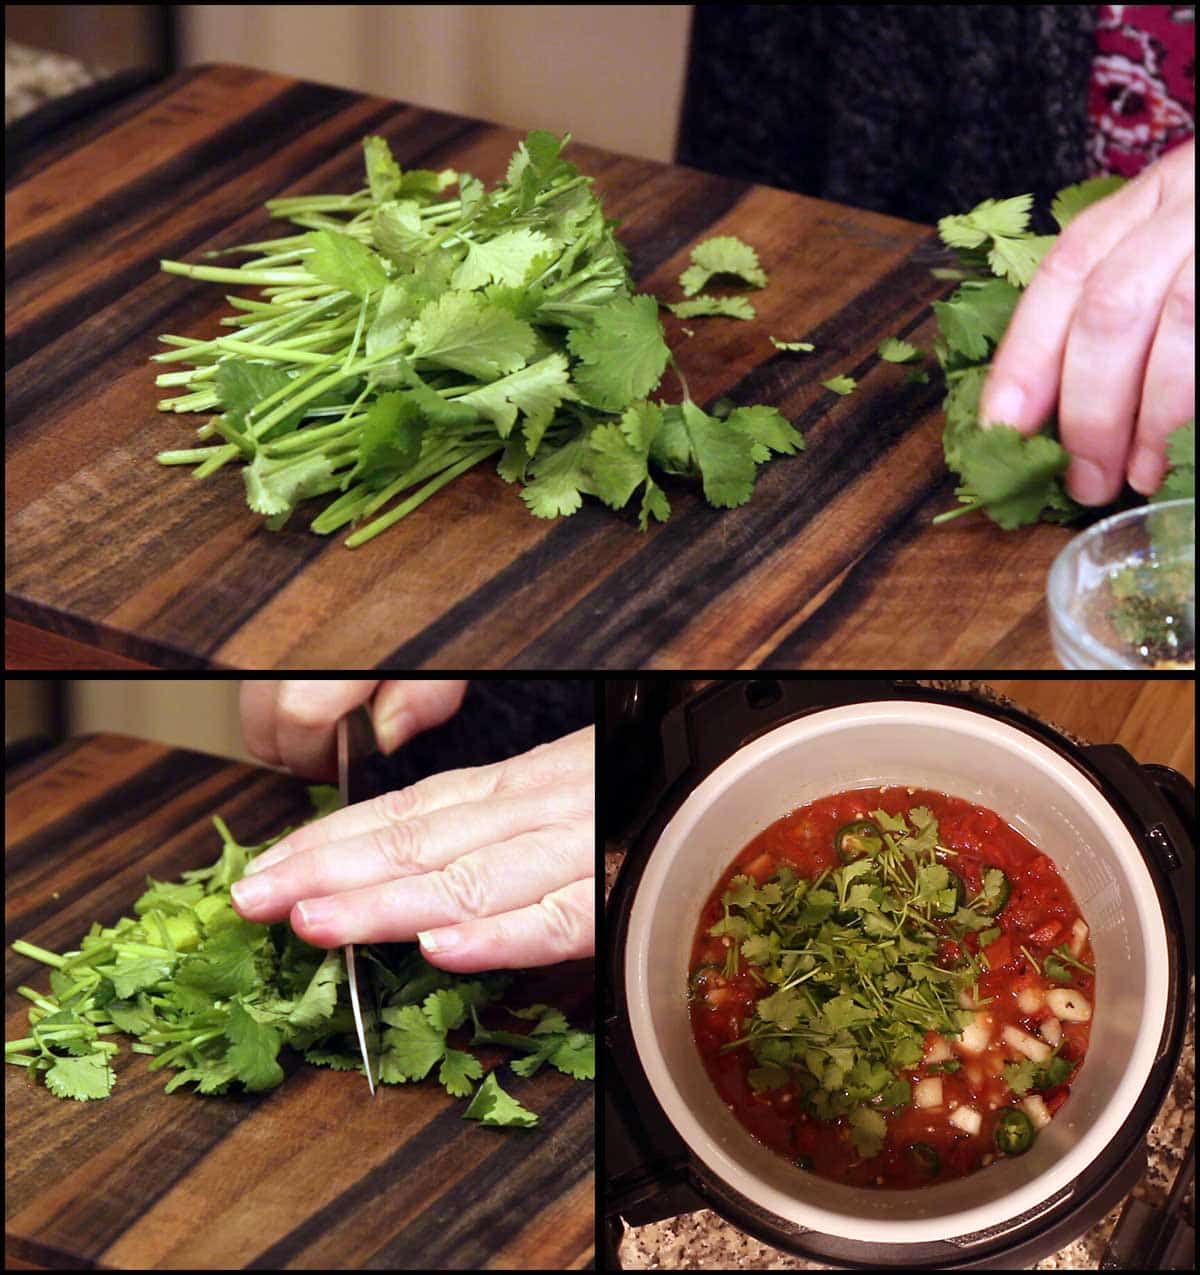 Chopping and adding cilantro to the pot